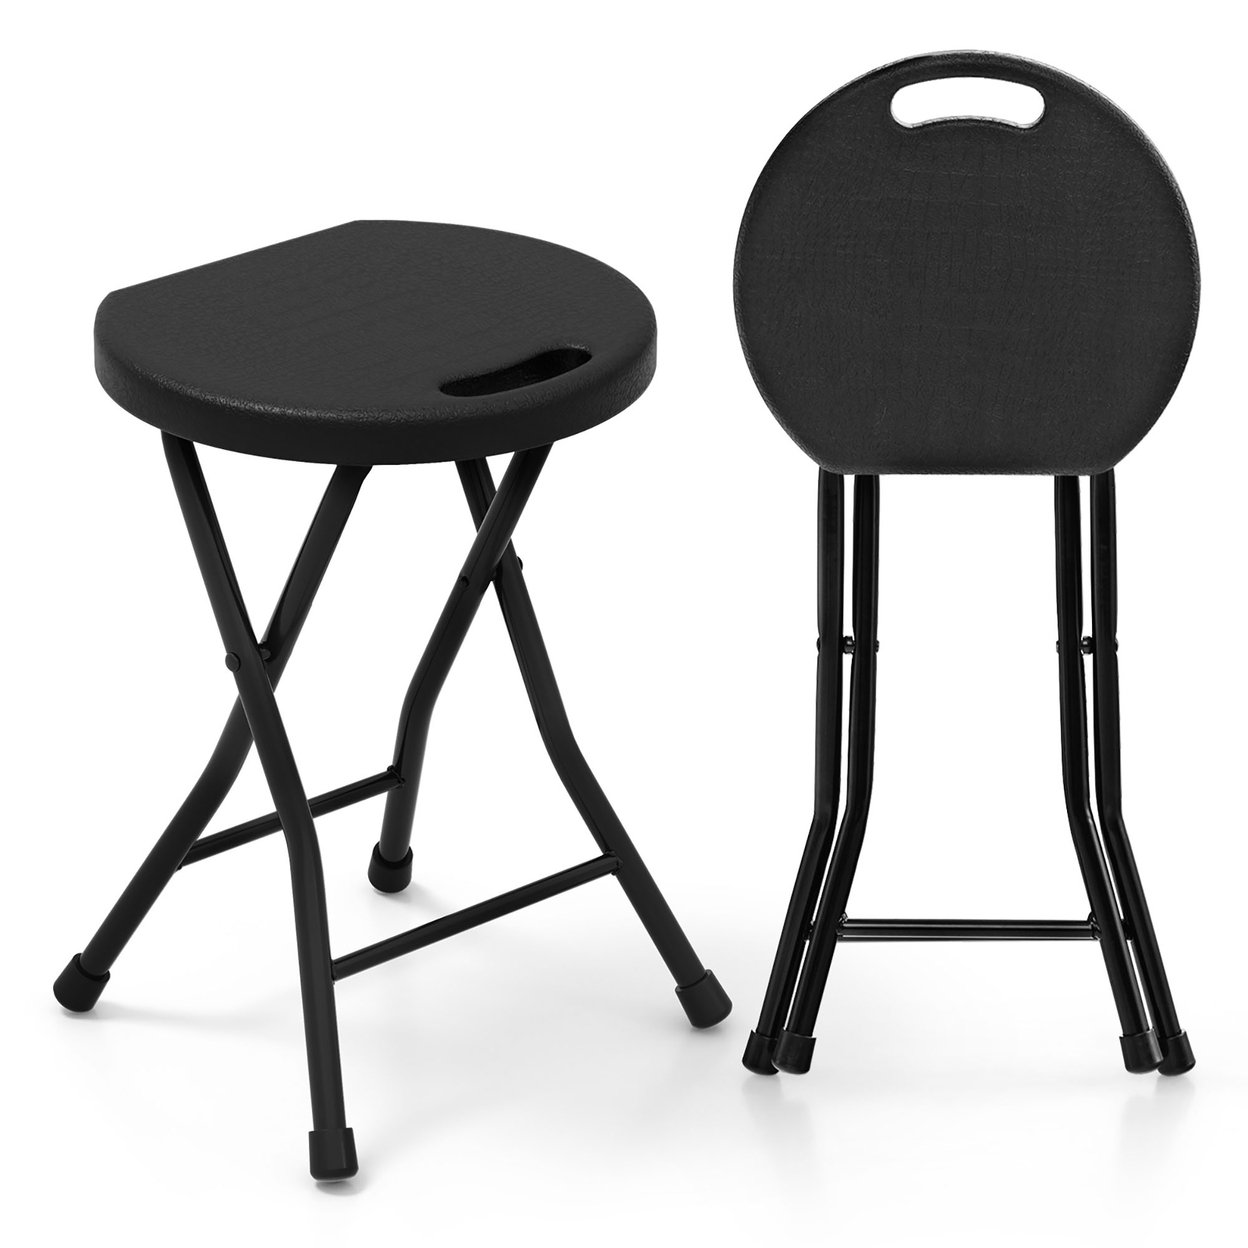 Set Of 2 Outdoor Folding Stool Portable Space-Saving Round X Shaped Chair Black